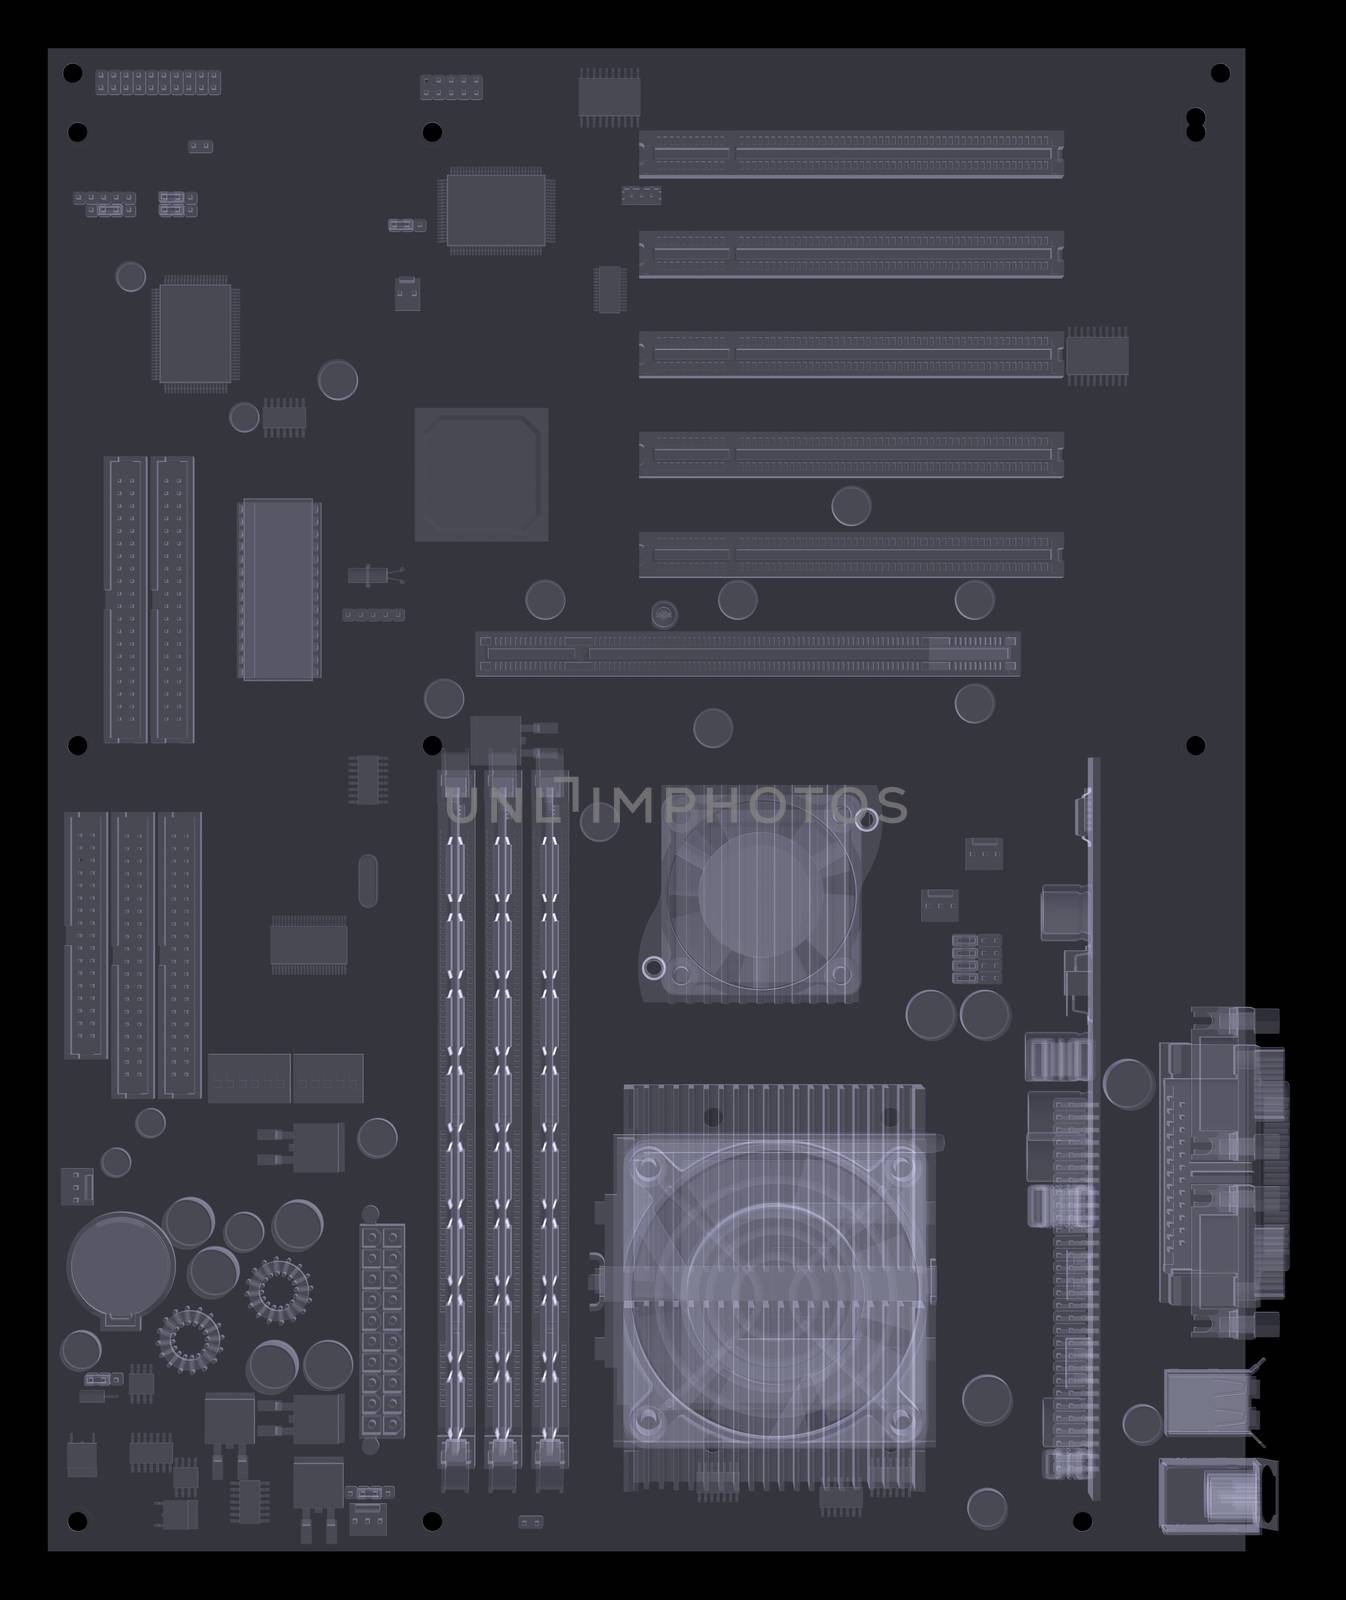 Motherboard. X-ray isolated render on white background